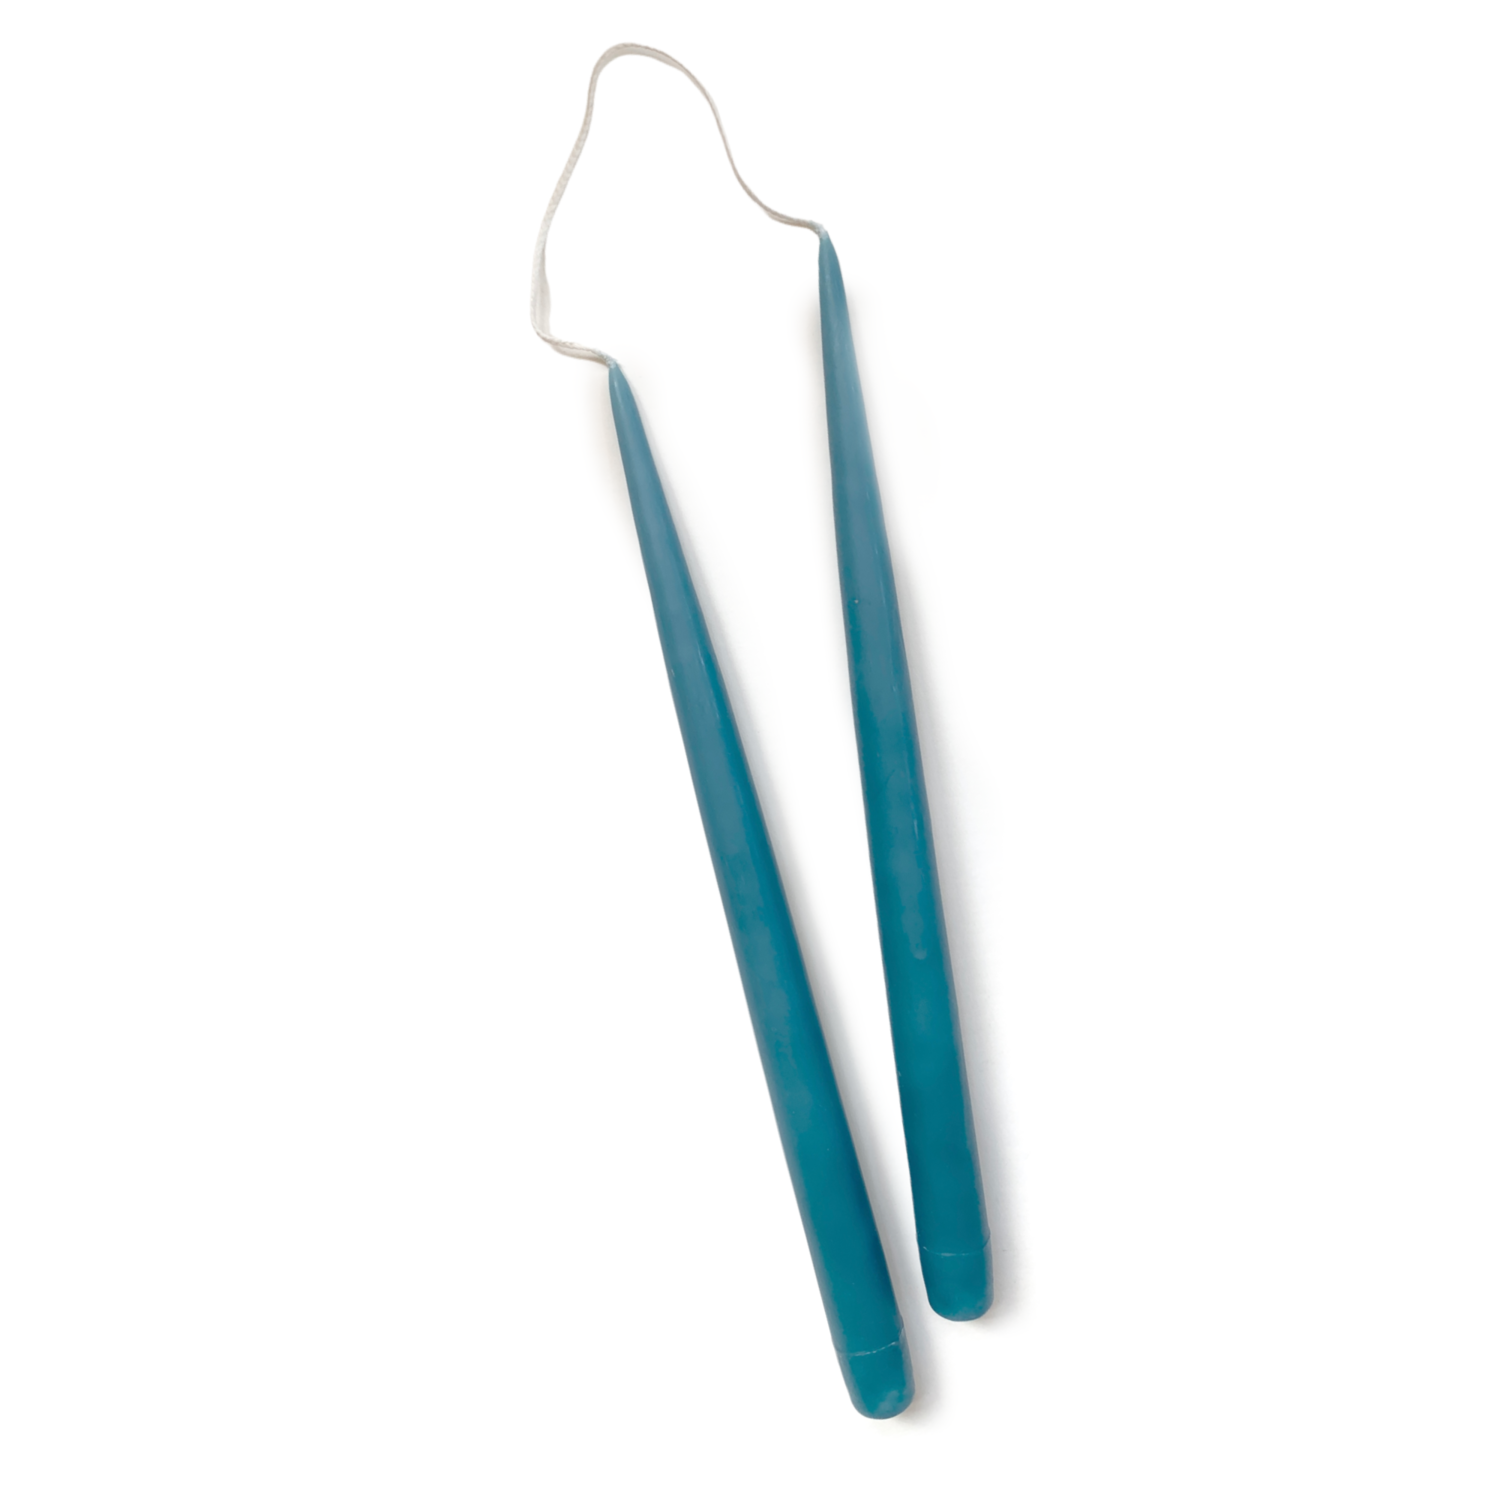 Spiral Taper Candle Set of Two – Dea Dia